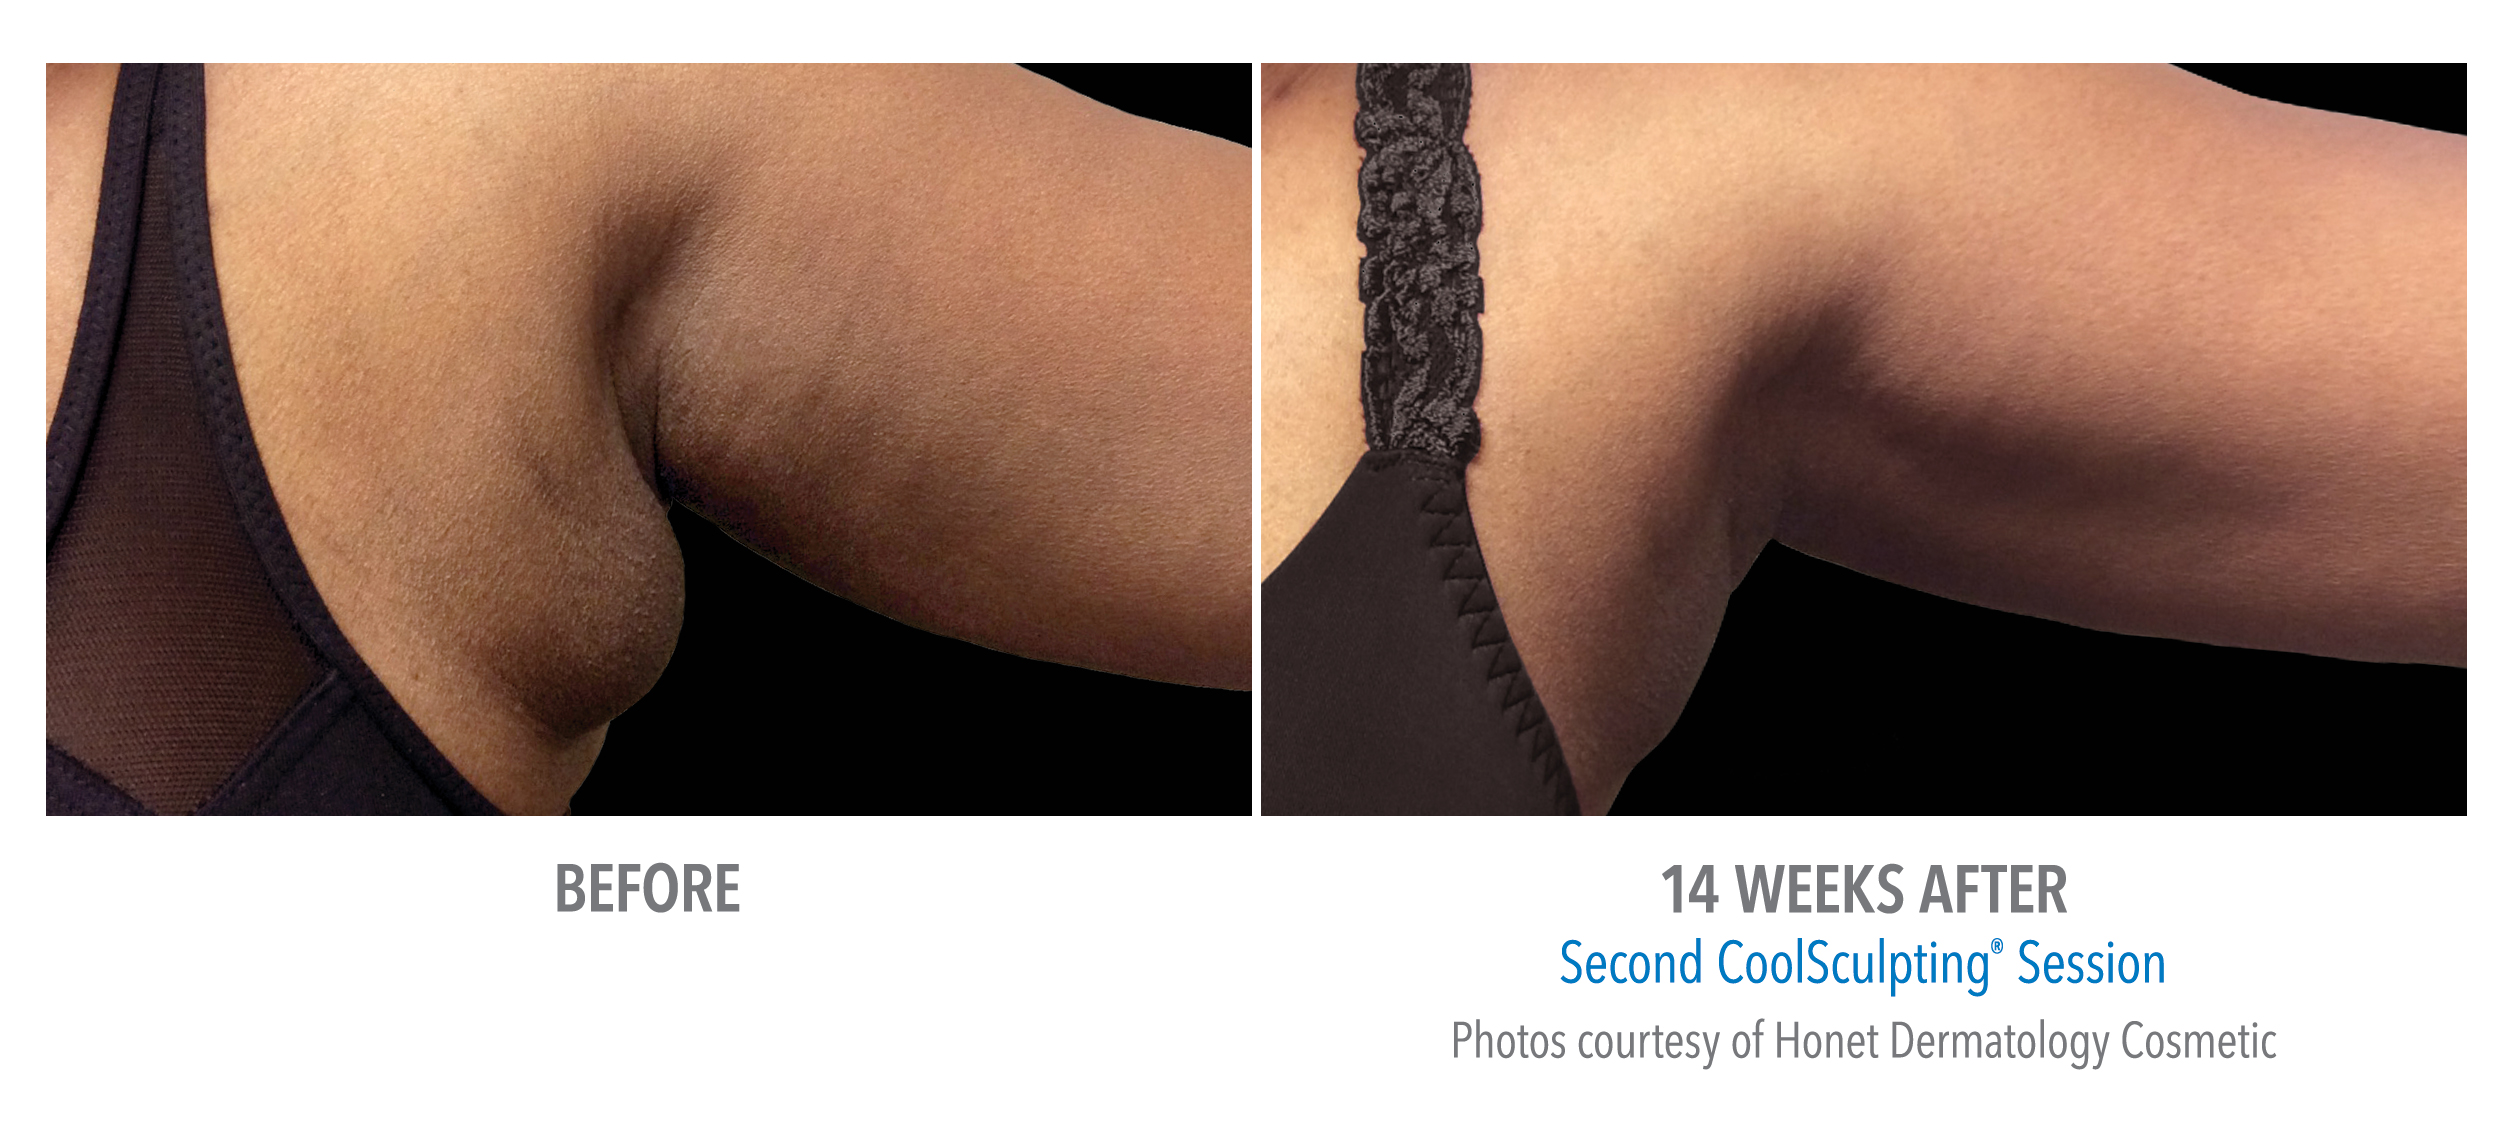 CoolSculpting Back Fat - Before & After, Reviews, Cost